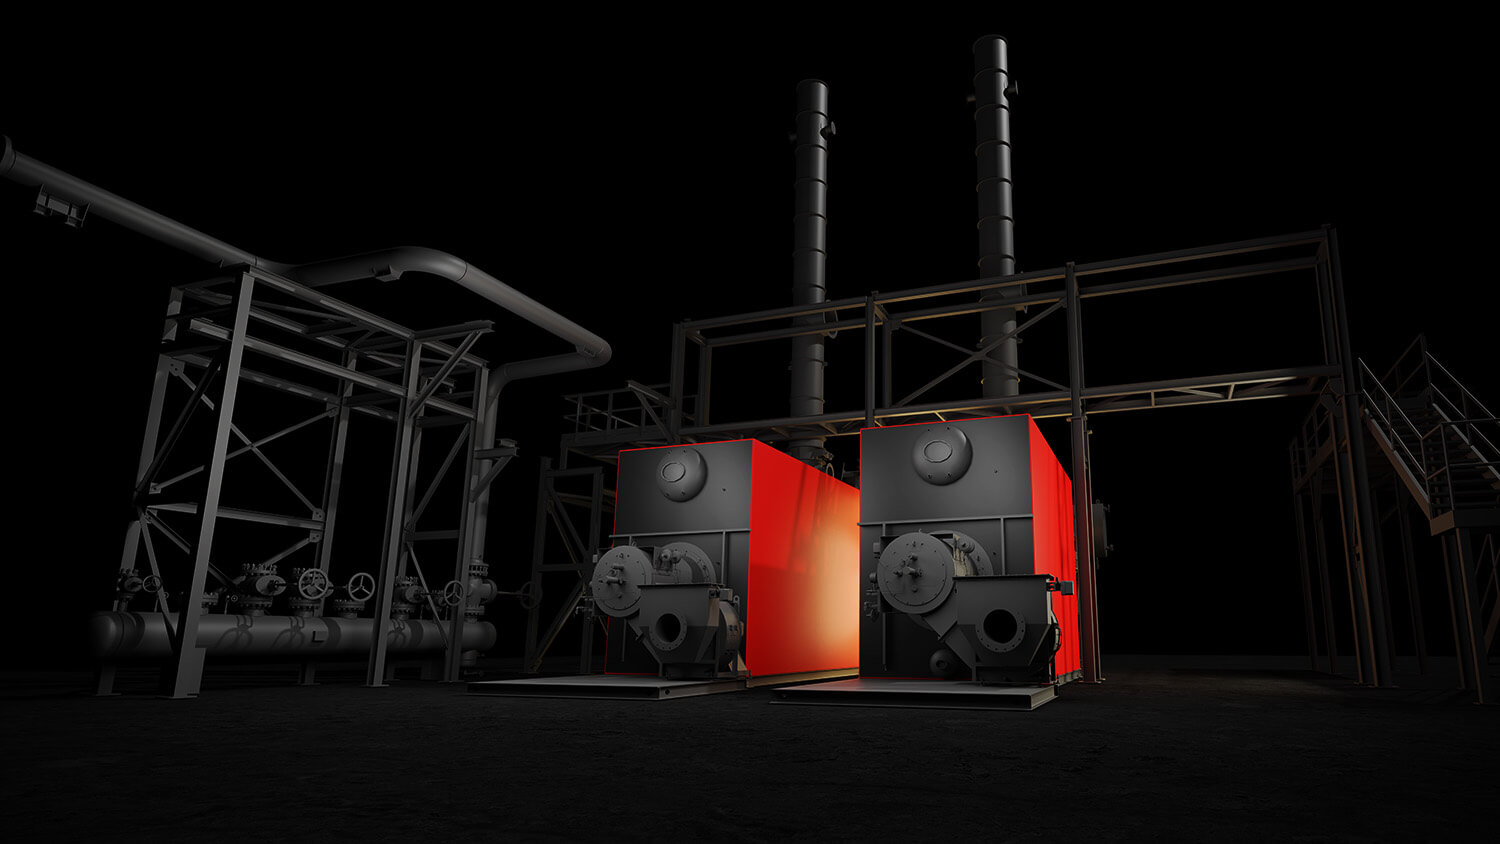 Design and operate the boiler room of the future